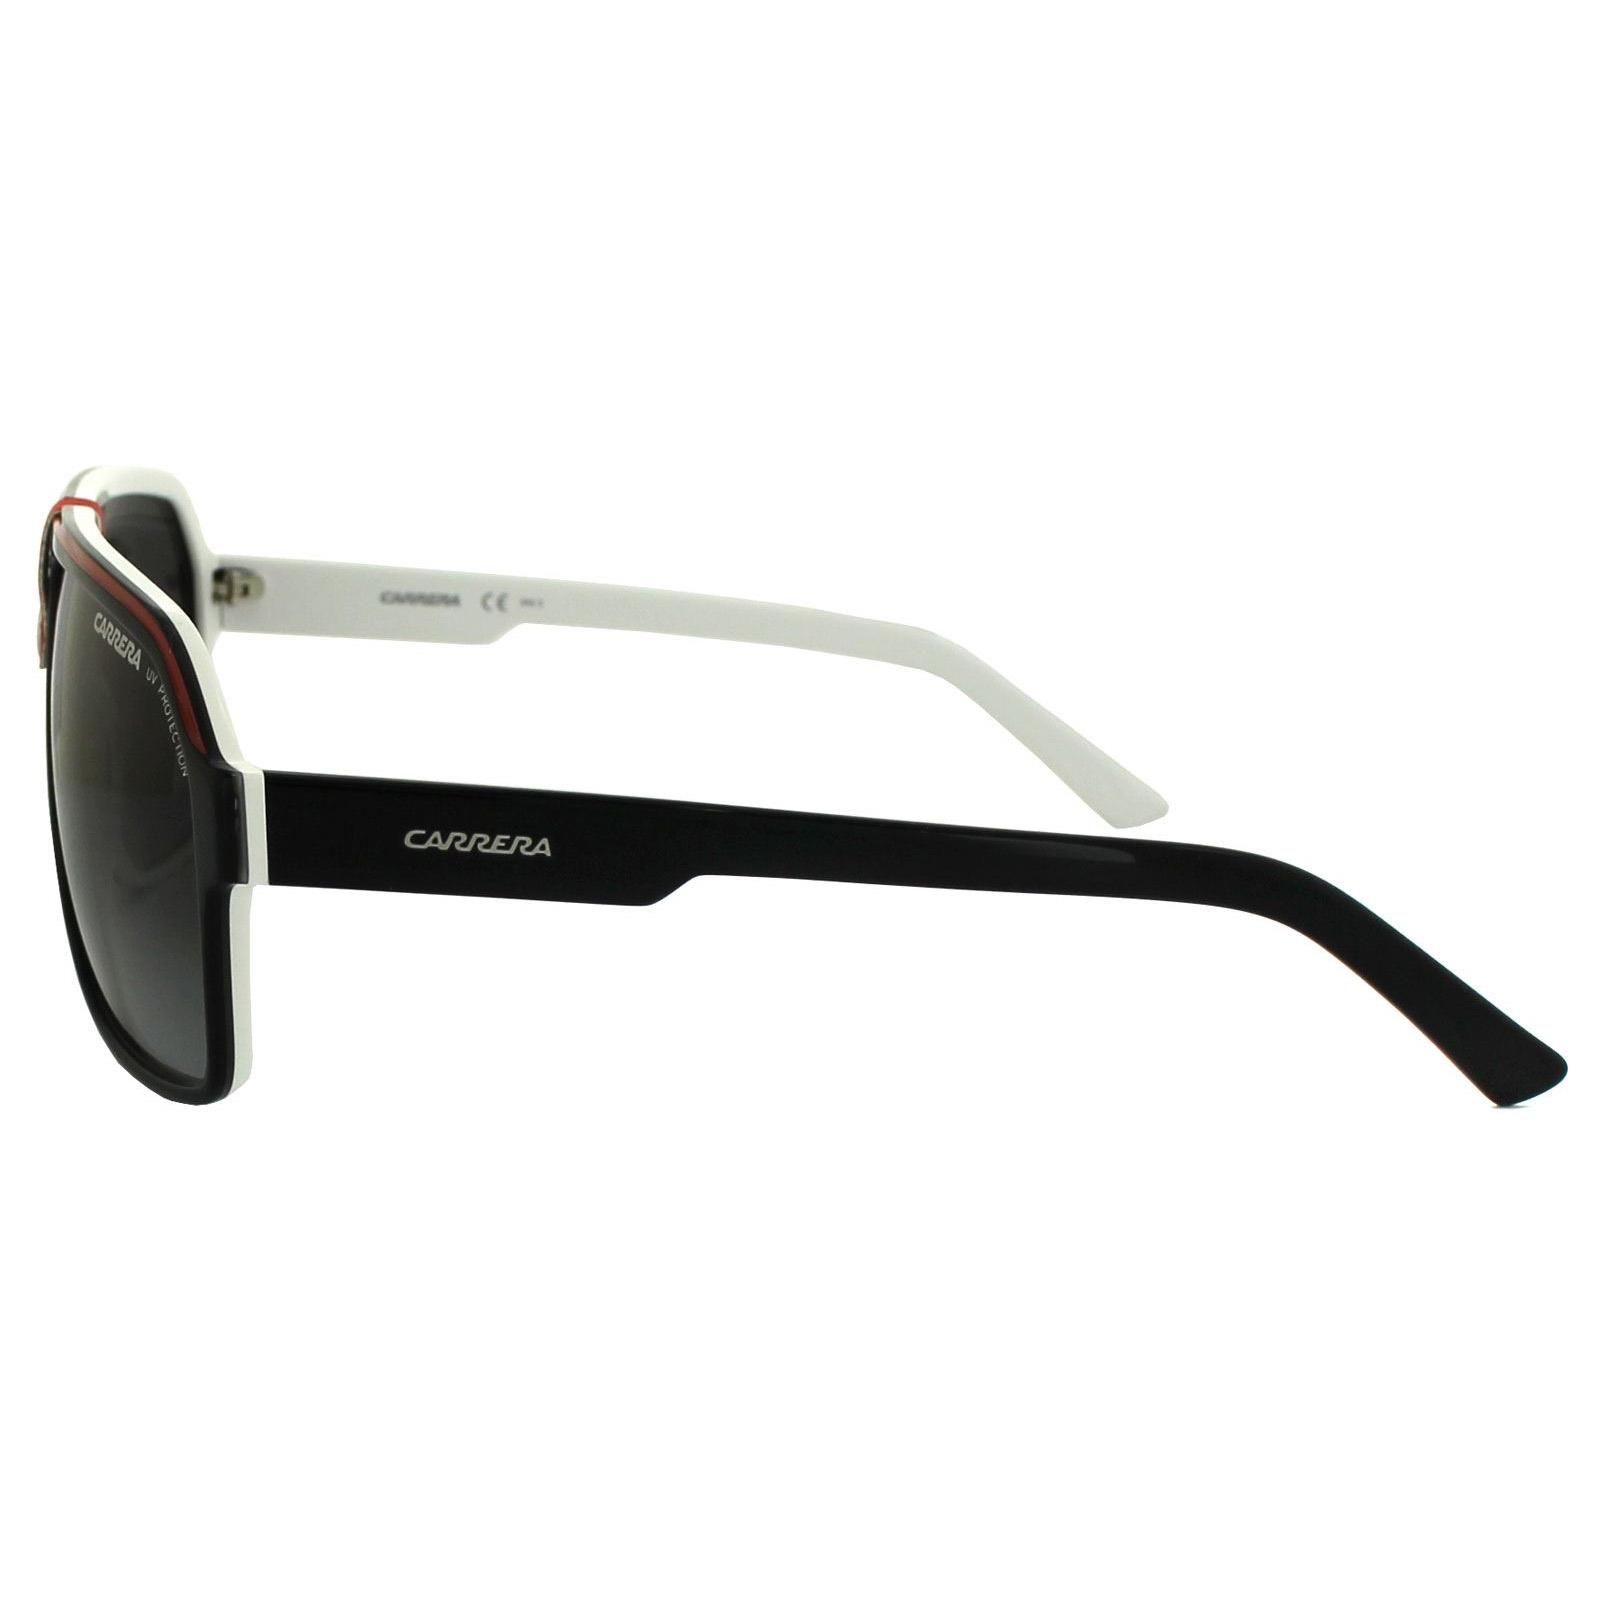 Carrera Sunglasses Carrera 33 8V4 PT Black & White Black Gradient are a contemporary version of the classic aviator with an angular design, squared lenses and stepped temples to provide a smart and stylish look.